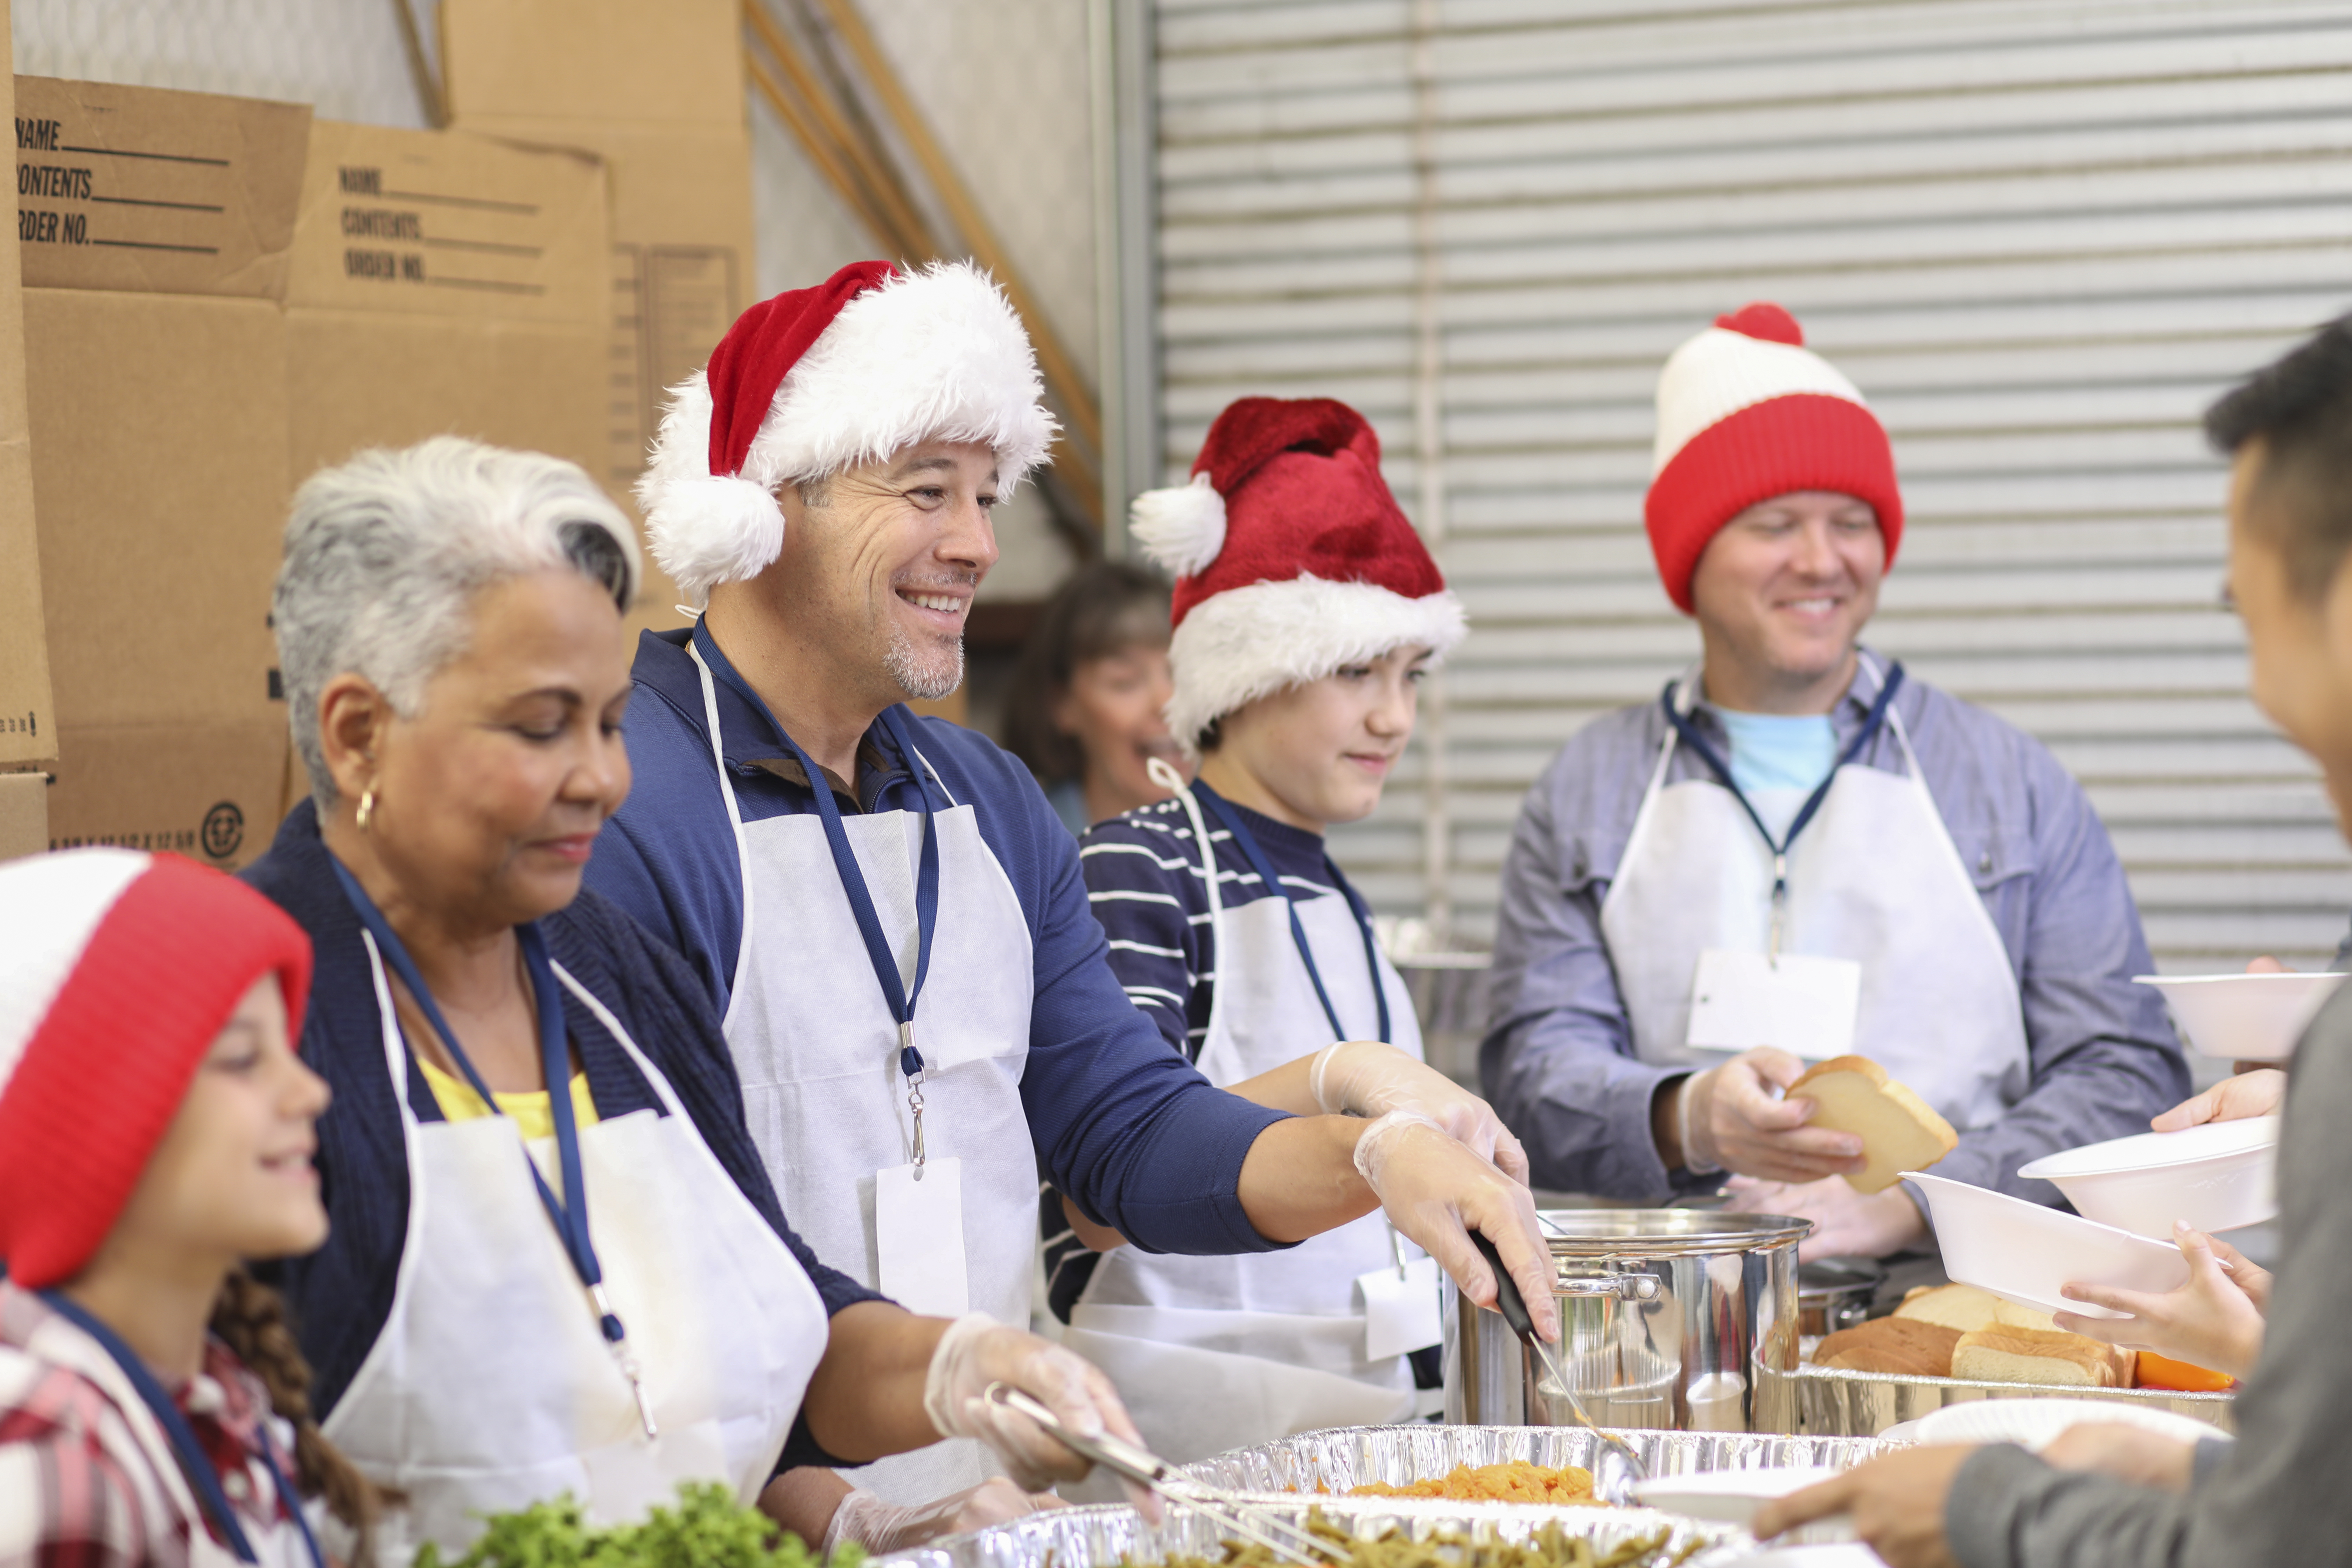 Multi-ethnic volunteers serves food at soup kitchen at Christmas.